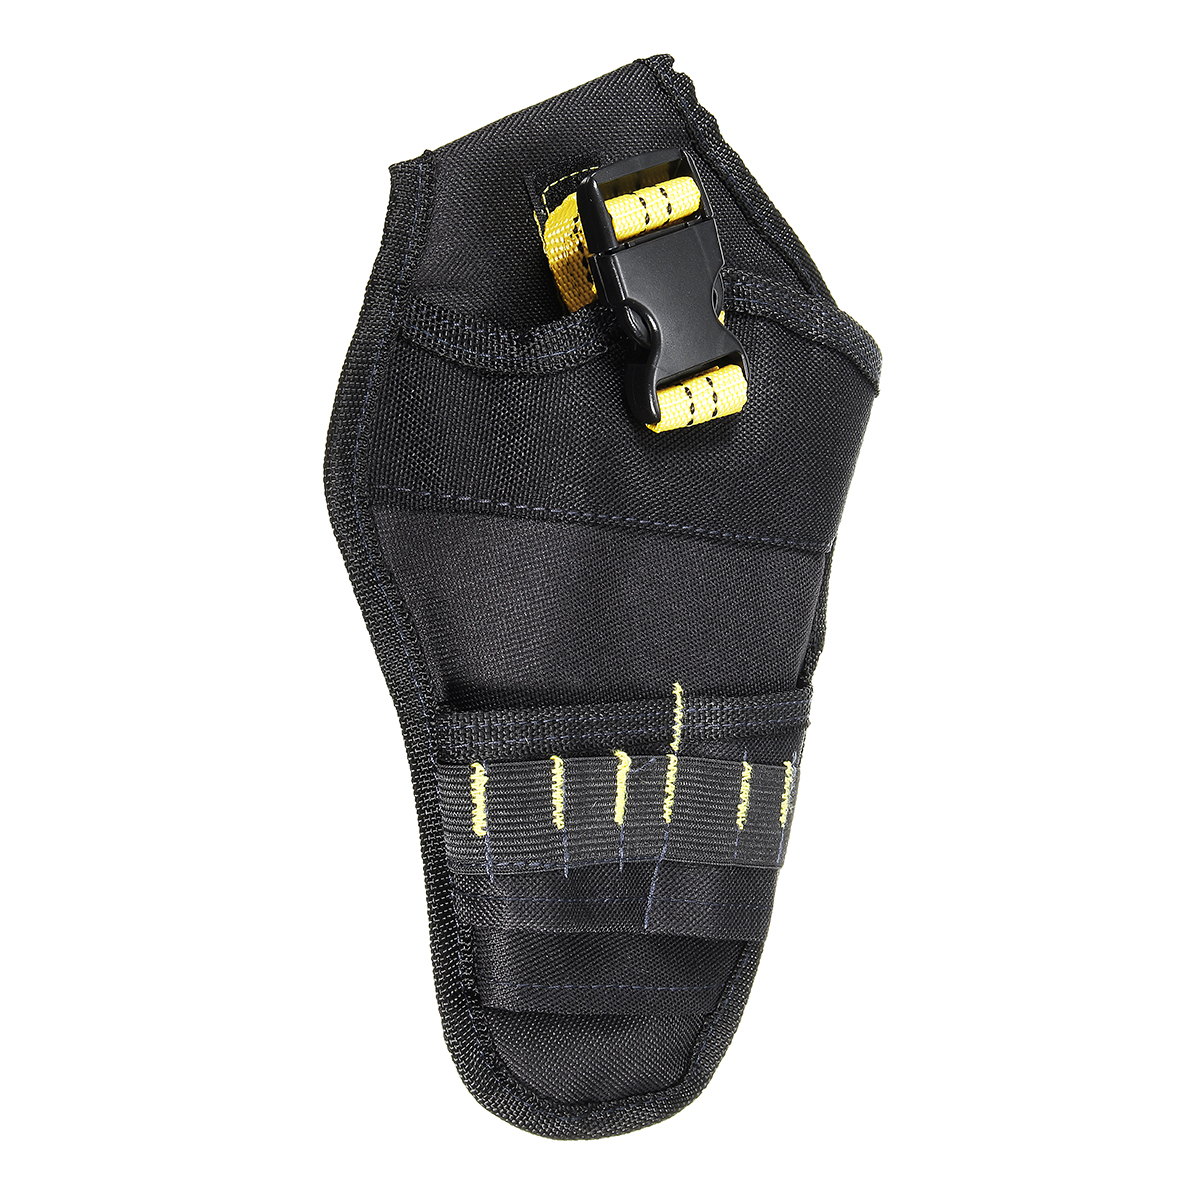 Heavy-Duty-Cordless-Impact-Drill-Holster-Tool-Bag-Belt-Pouch-Pocket-Holder-1187146-3